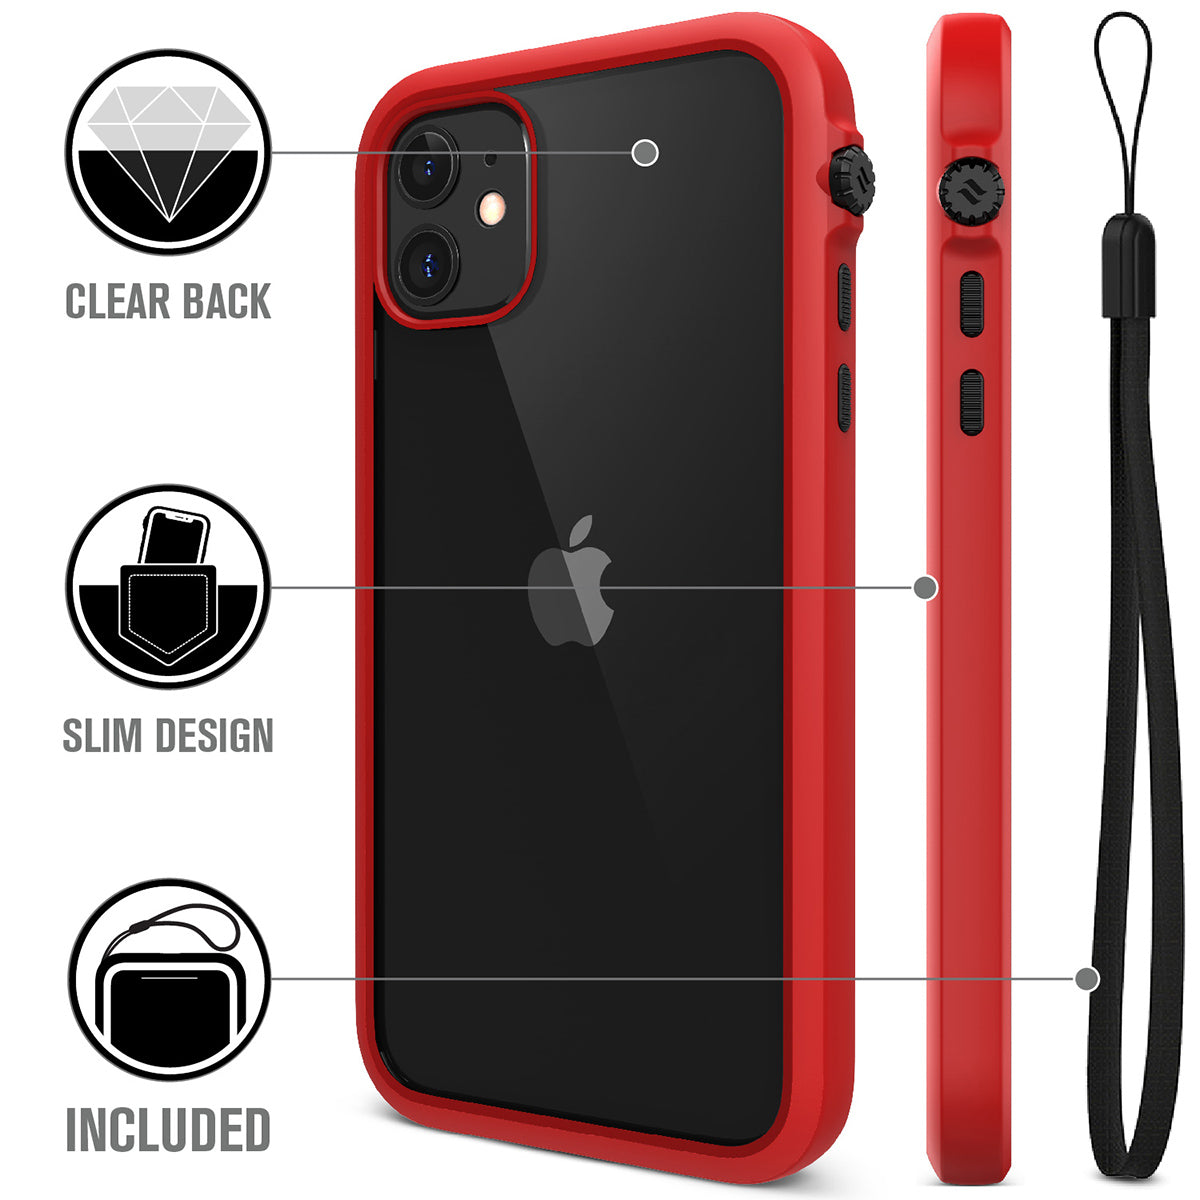 catalyst iPhone 11 series impact protection case flame red showing the back view and buttons of the case for iPhone 11 and a lanyard text reads clear back slim design included